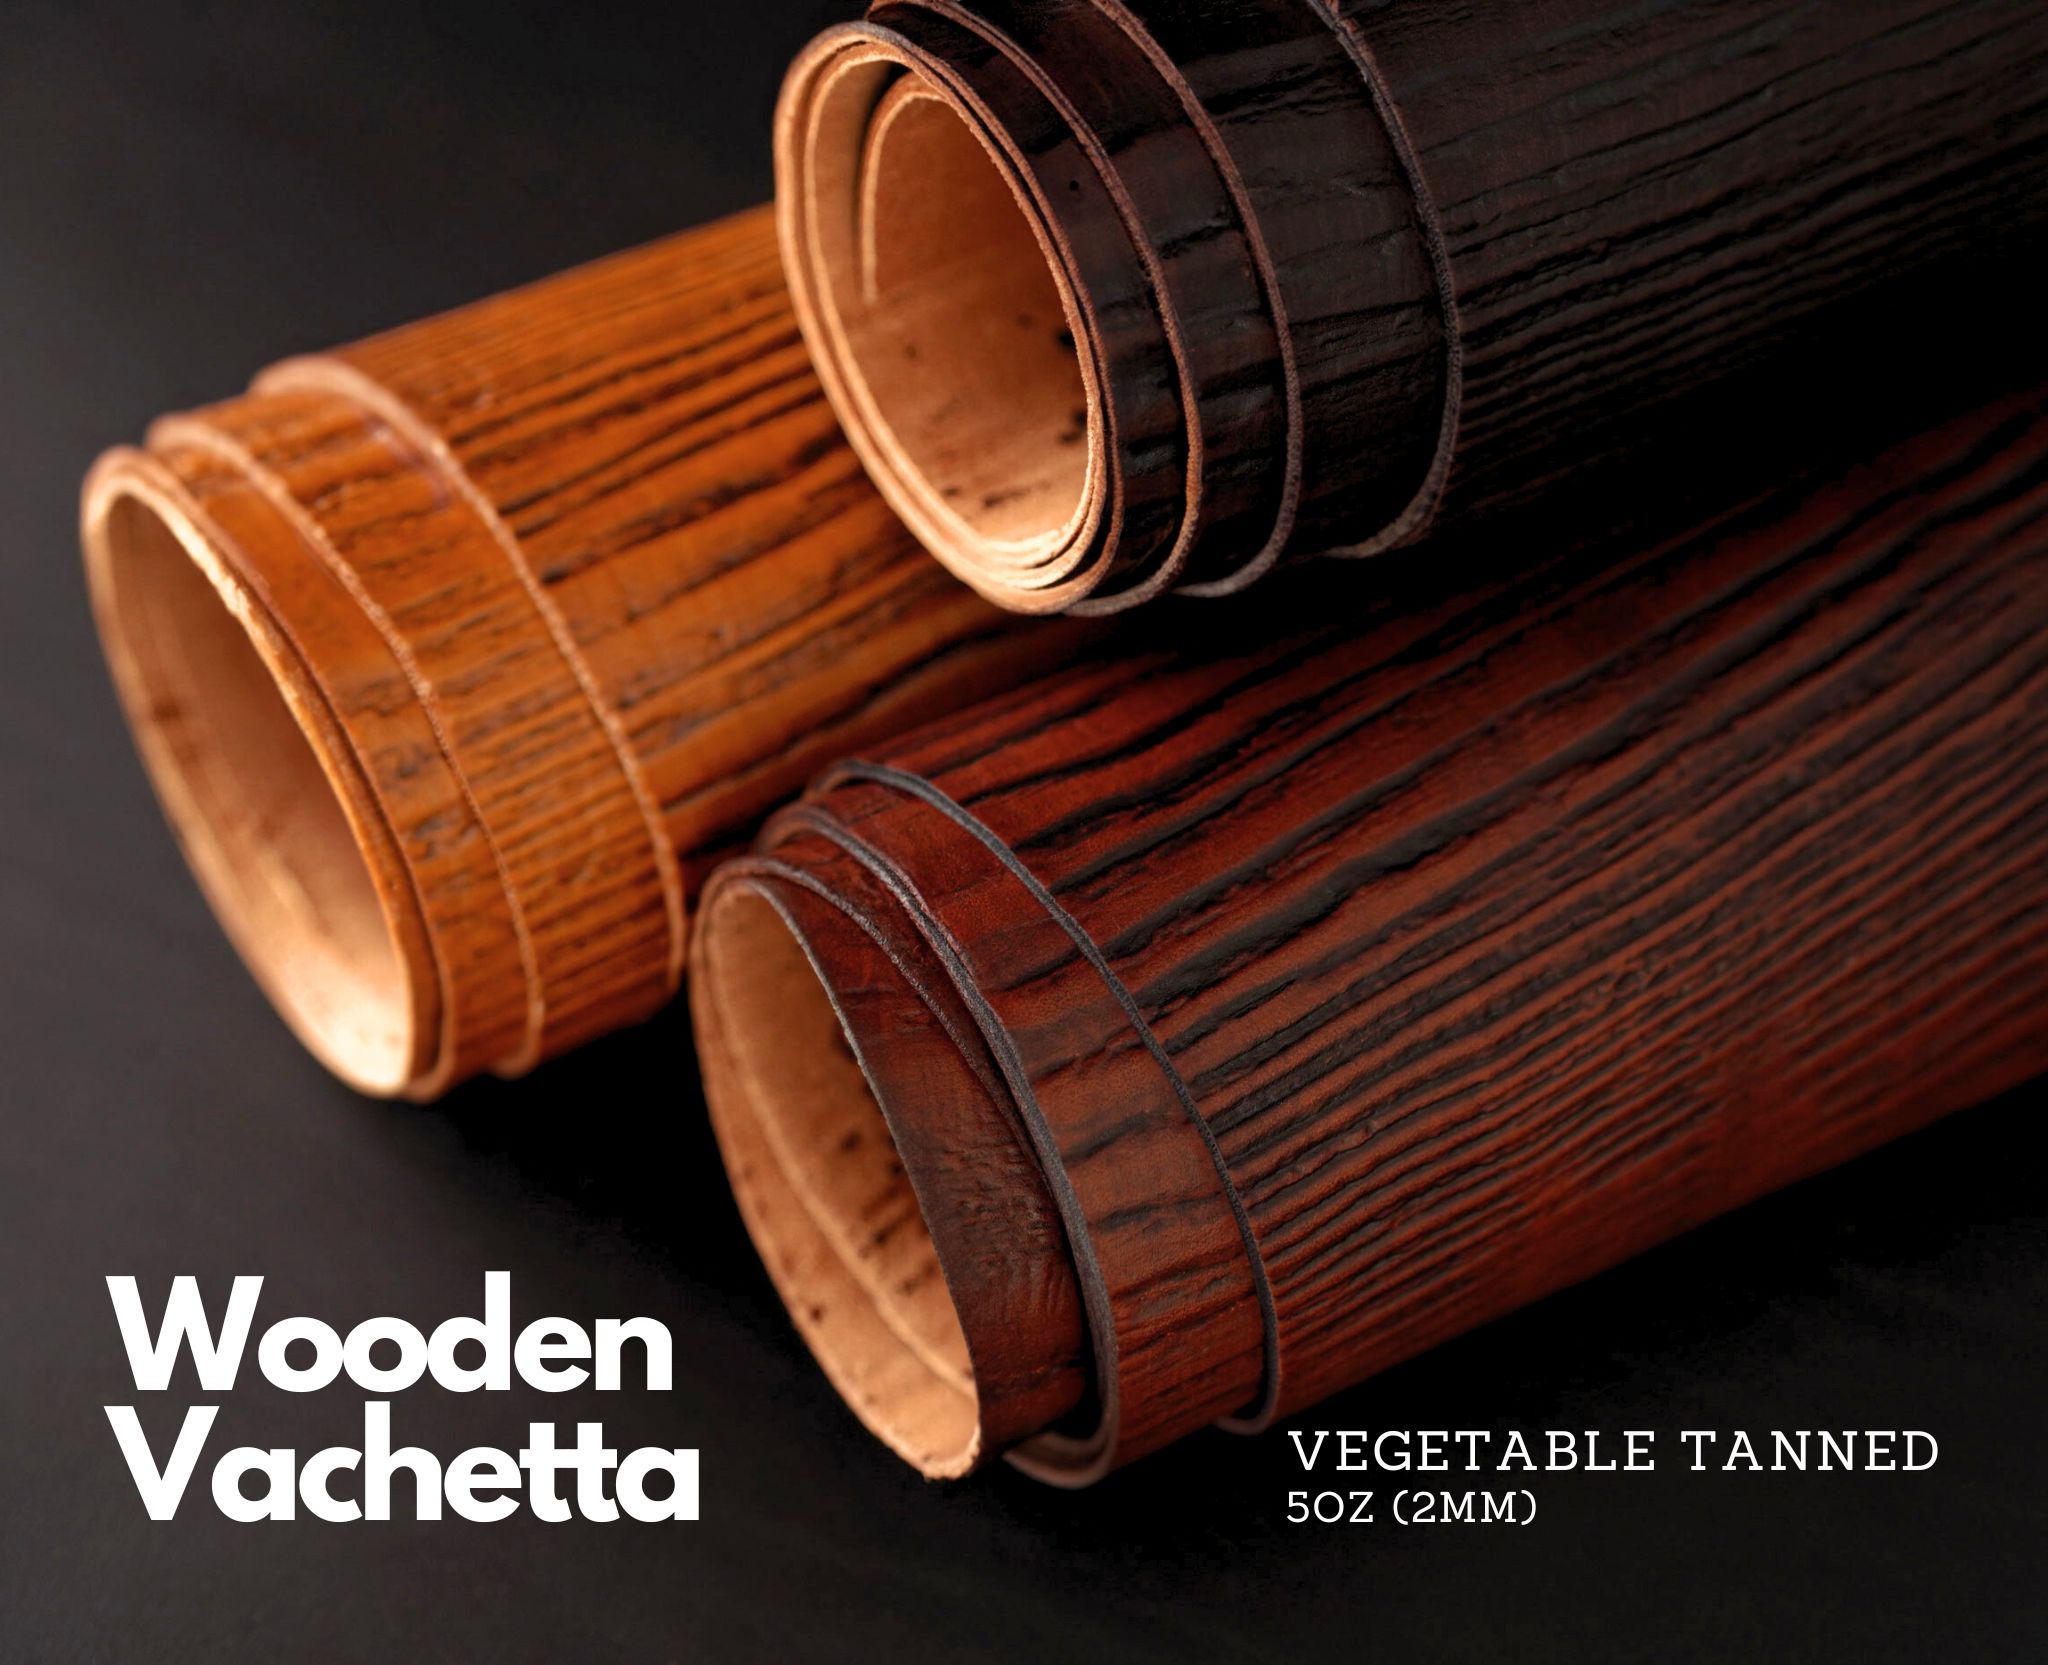 Vachetta leather - Everything you need to know!